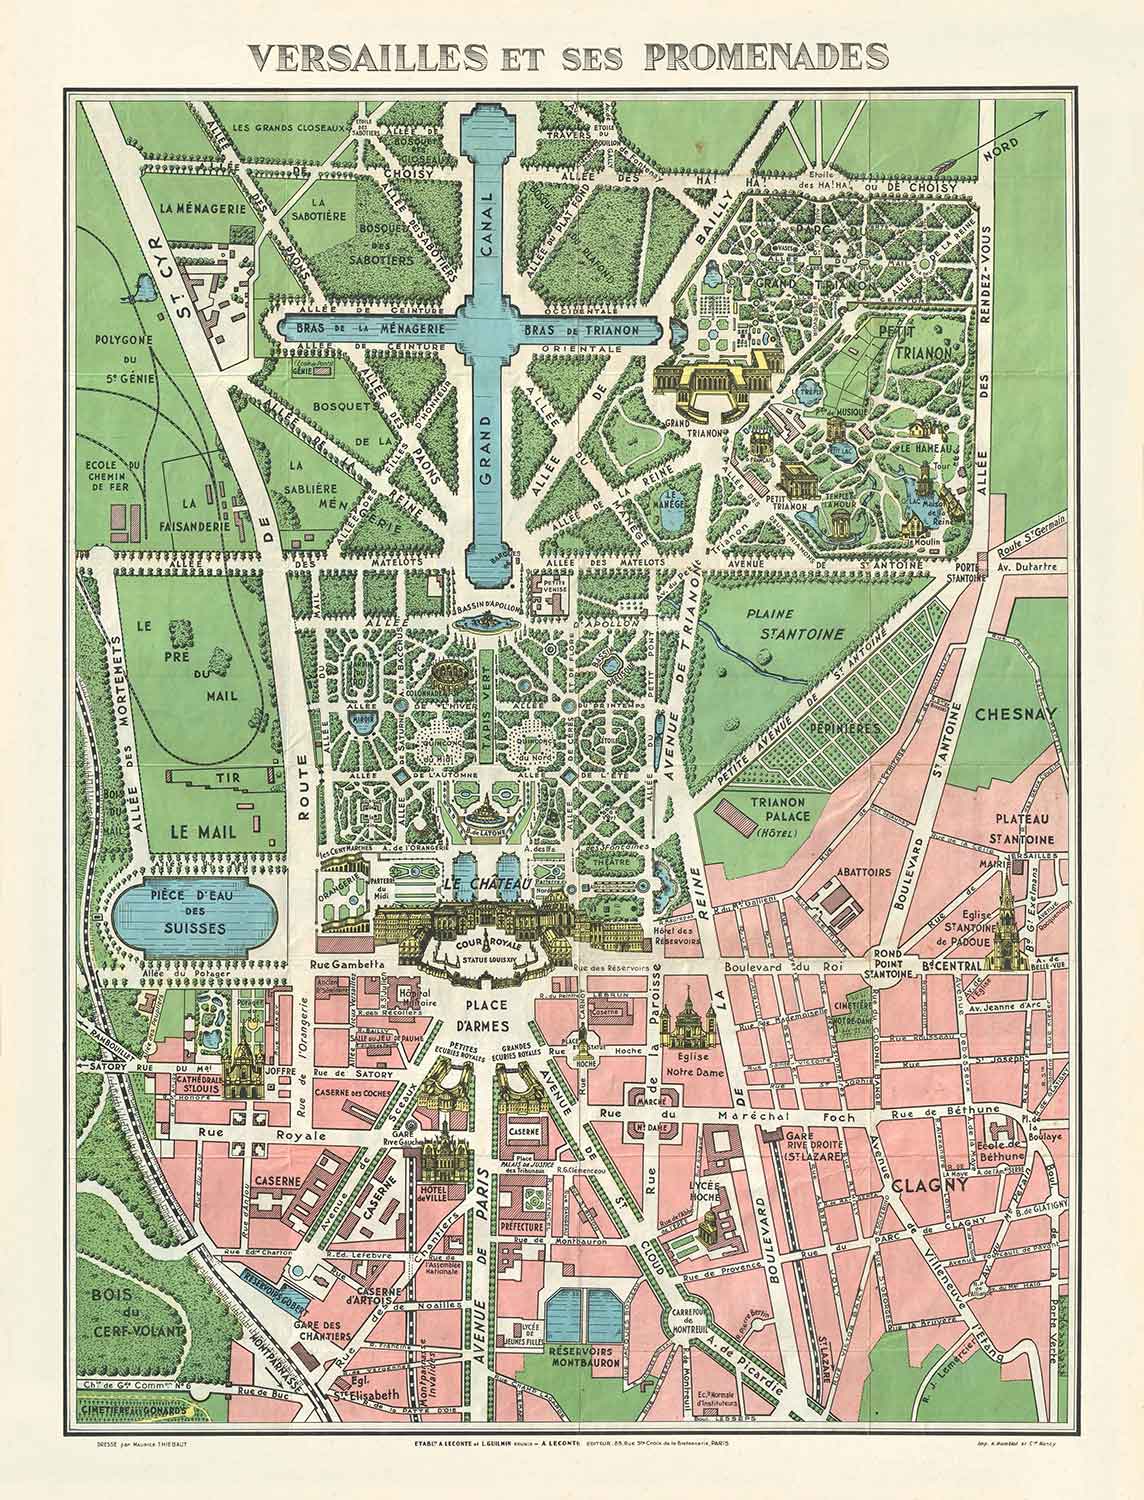 Old Map of the Palace of Versailles & Gardens, 1920 by Leconte - Paris, Grand Canal, King Louis XIV, XV, XVI